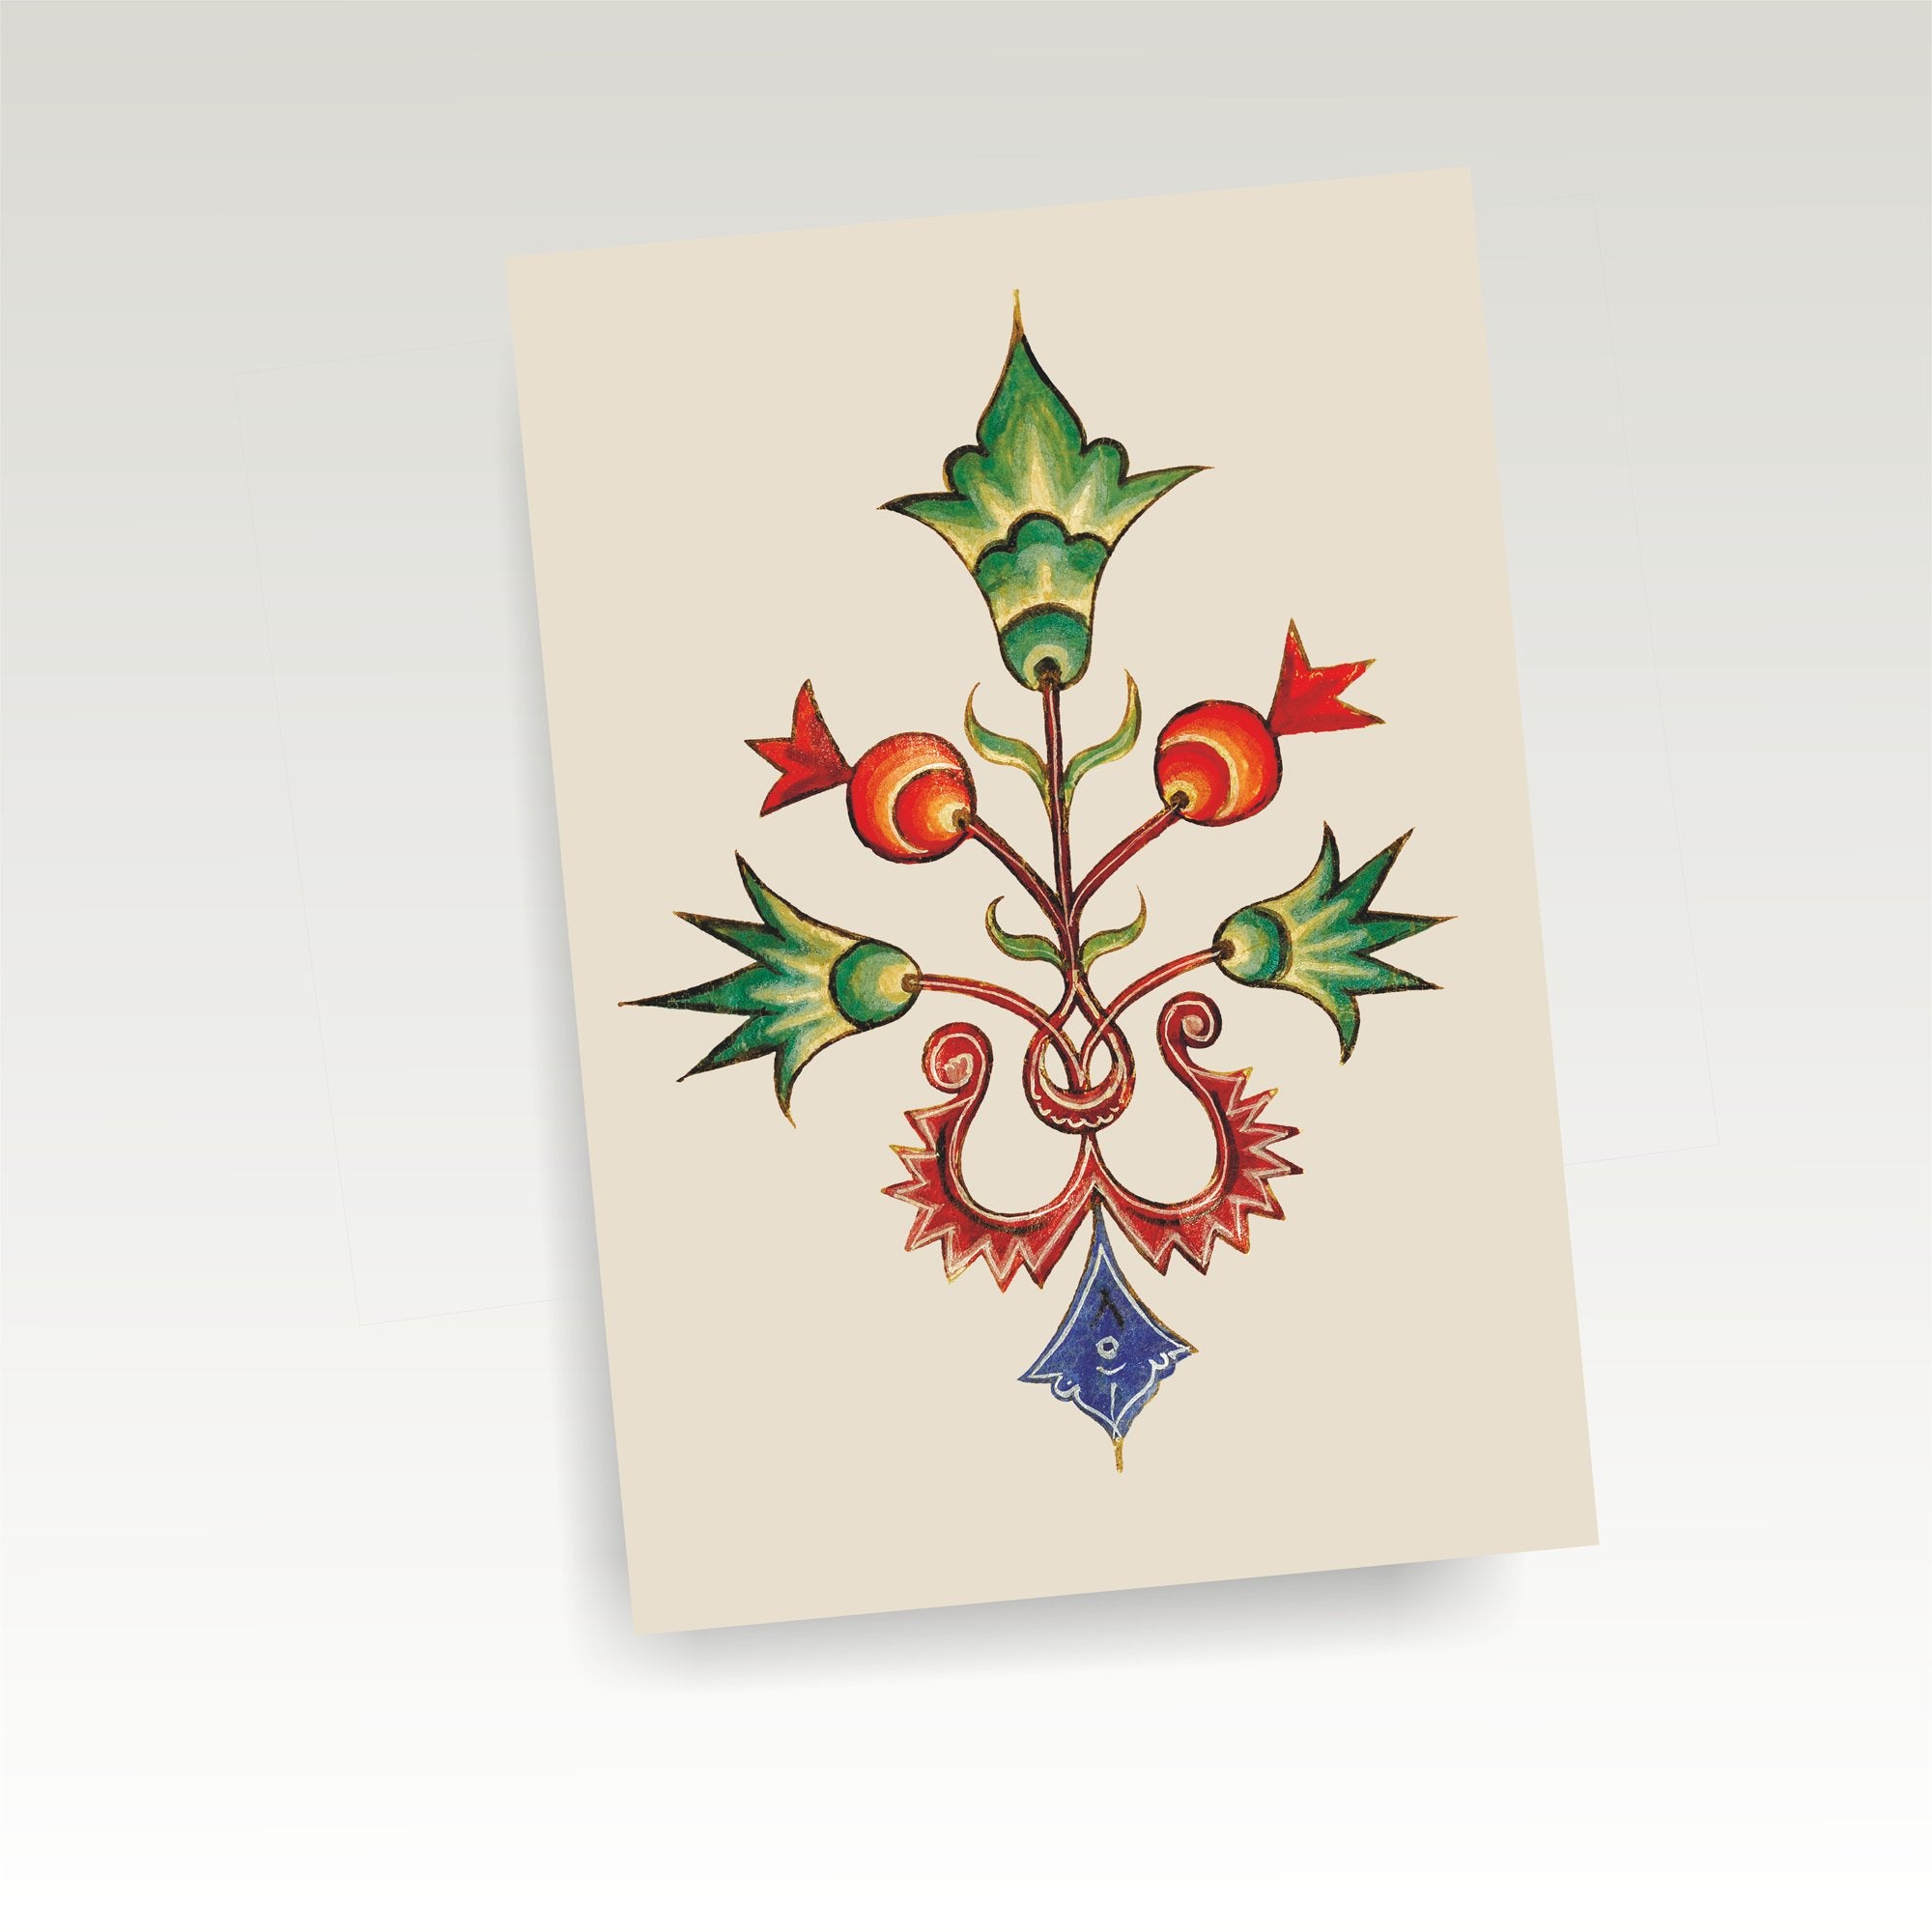 Armenian Postcards Collection by Kyurkchyan - 14 pack